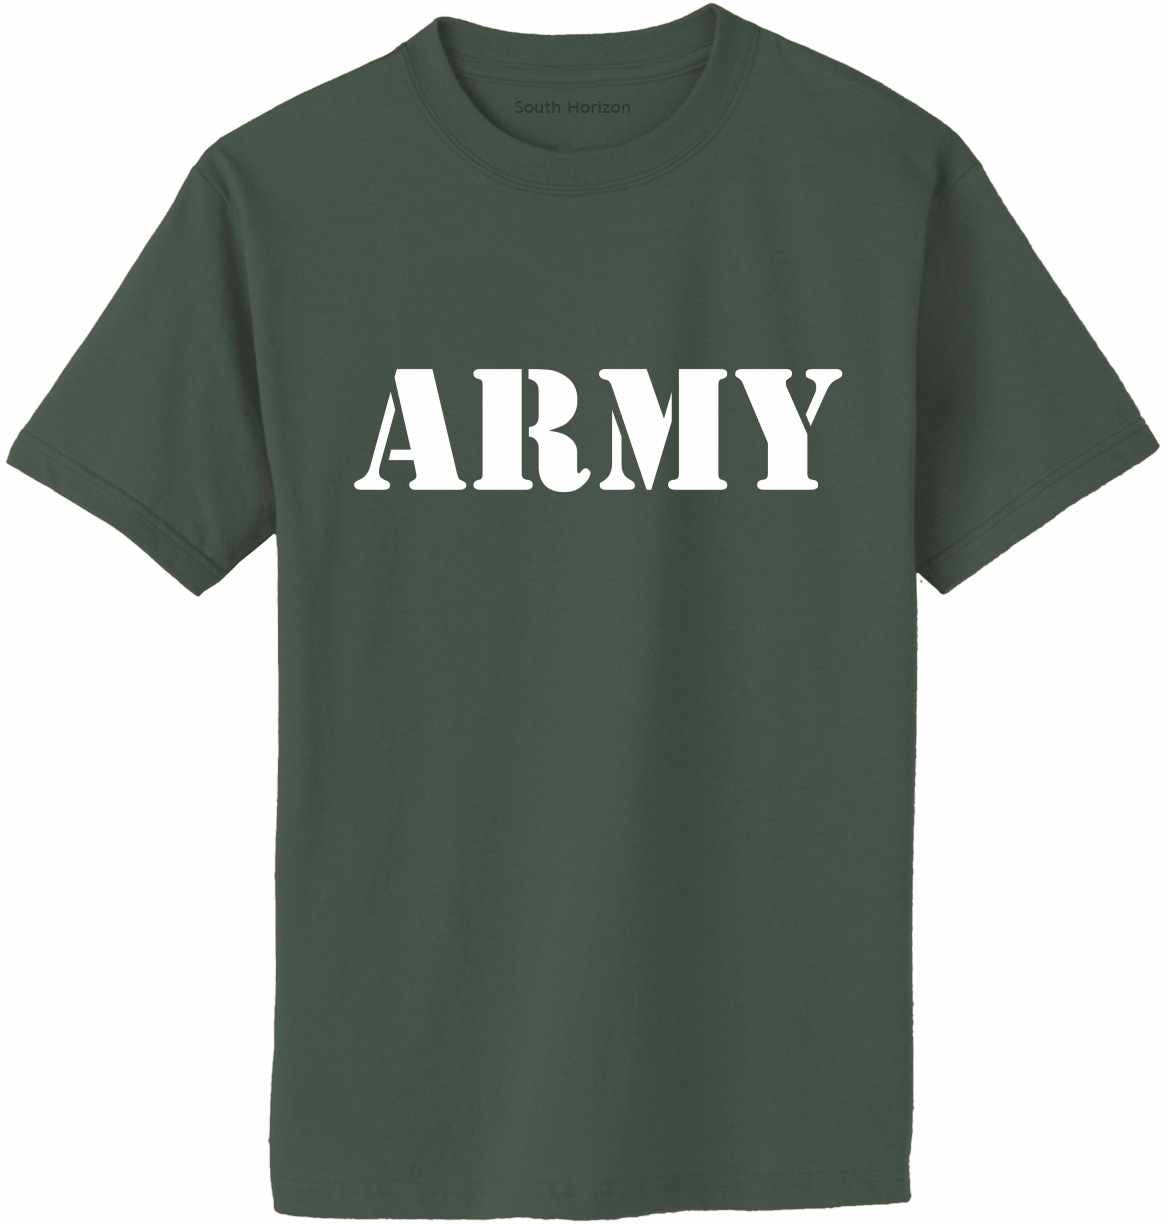 ARMY Adult T-Shirt